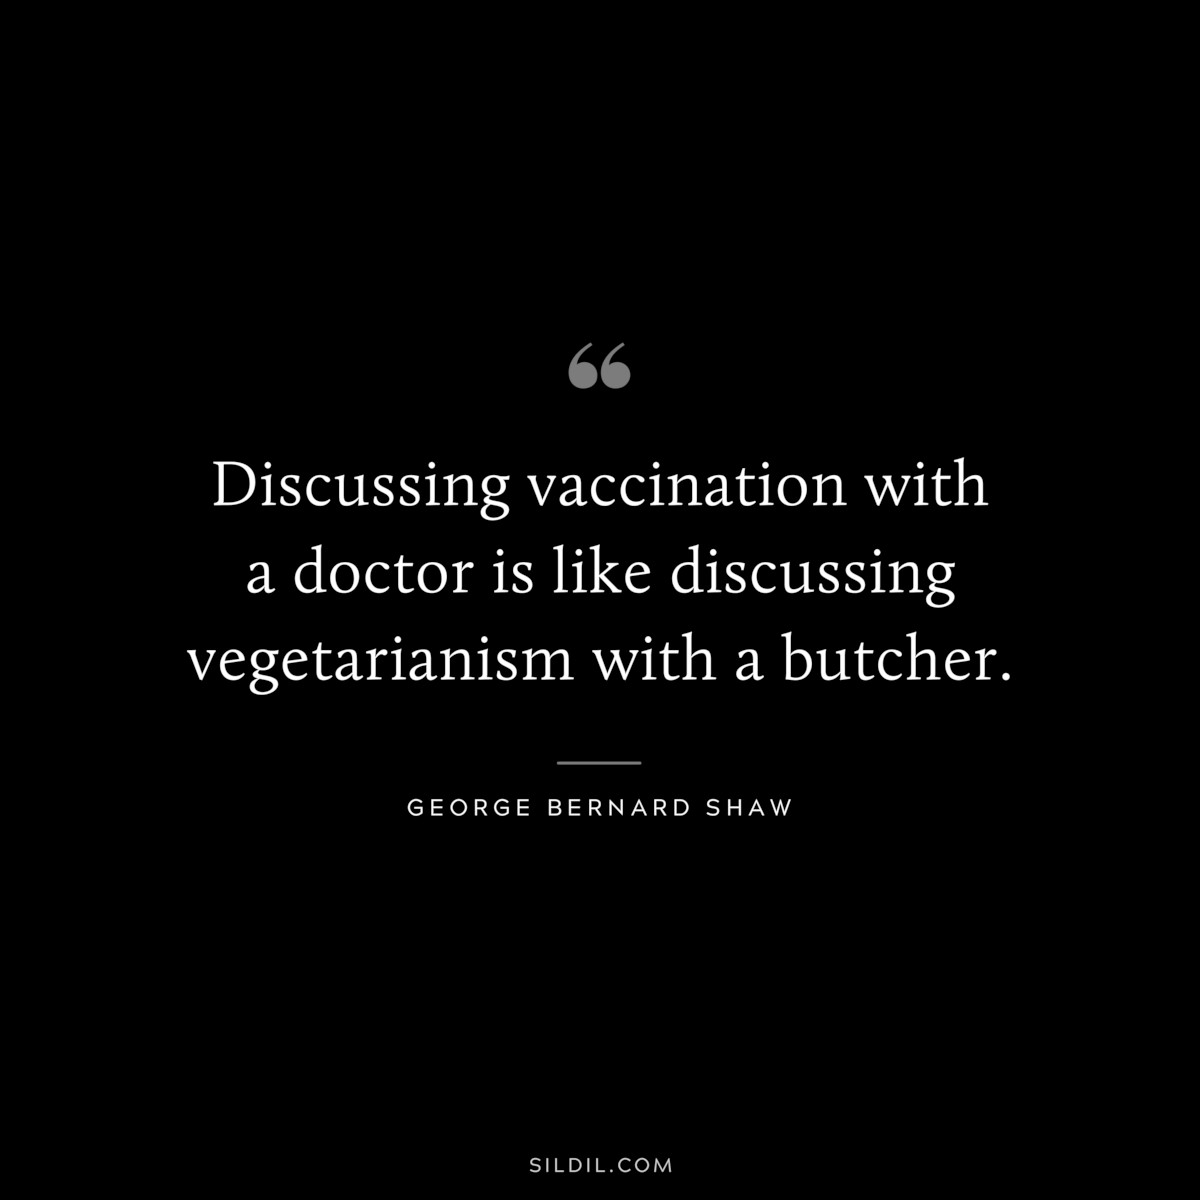 Discussing vaccination with a doctor is like discussing vegetarianism with a butcher. ― George Bernard Shaw